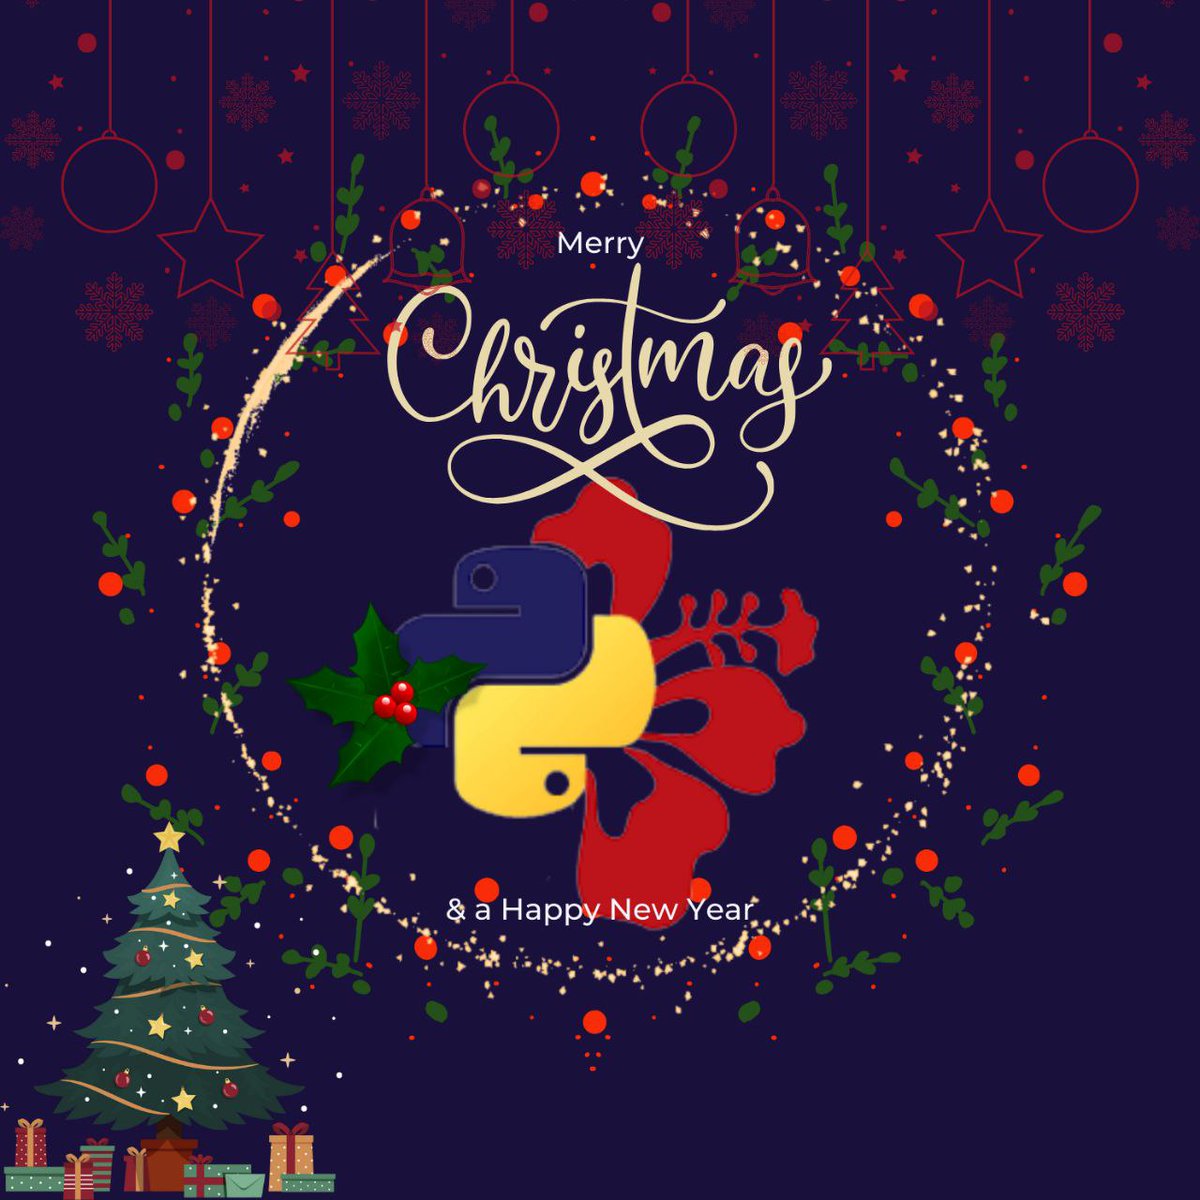 Merry Christmas, from PyCon MY to all Pythinistas around the world!